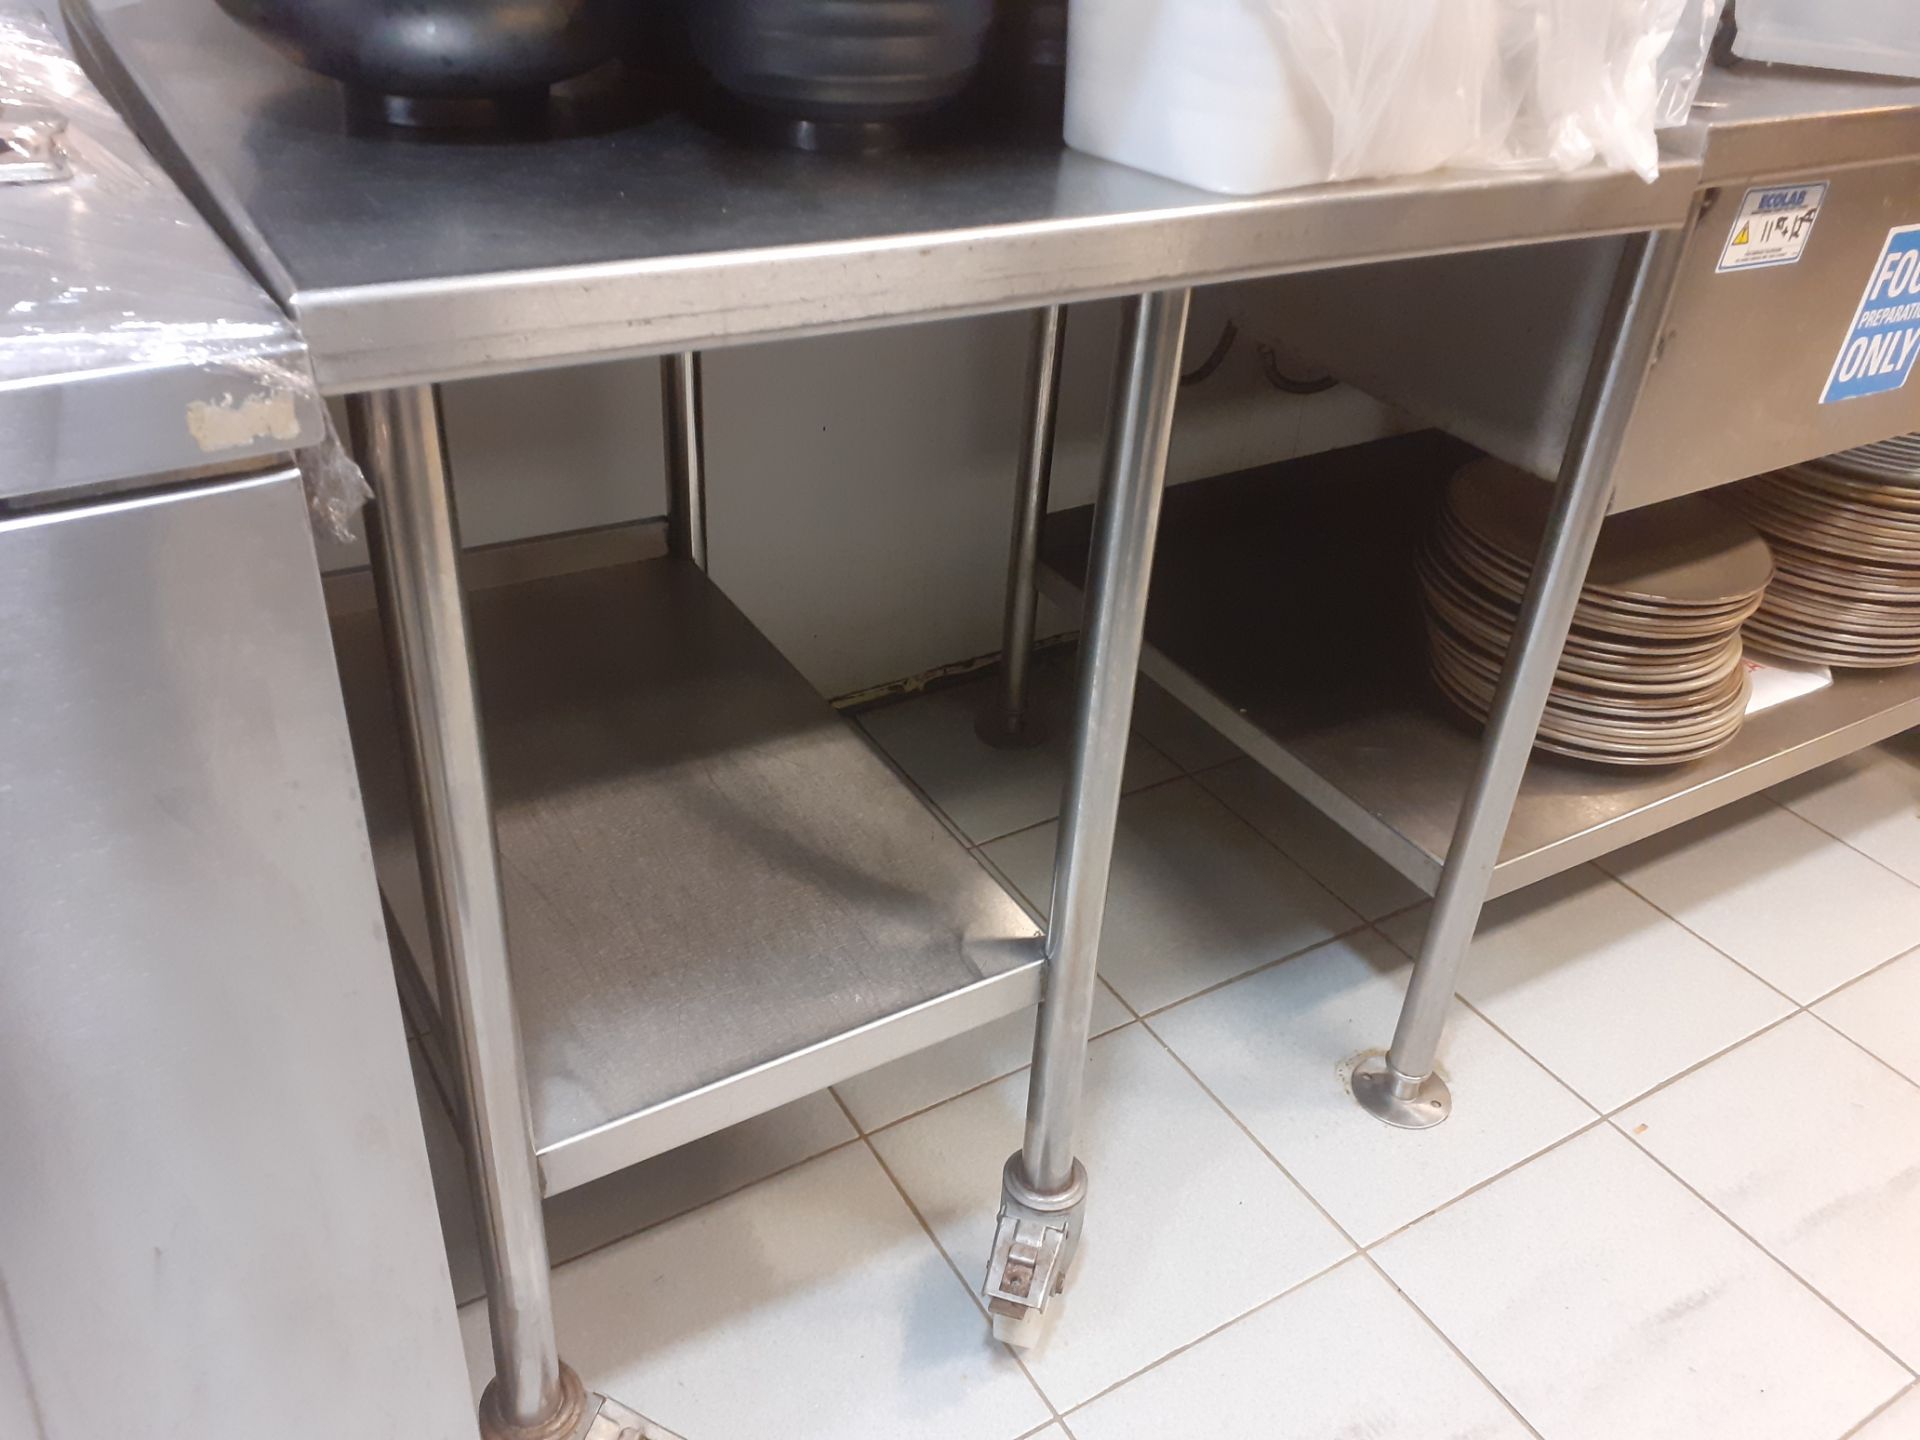 1 x Stainless Steel Prep Table With Undercounter and Castors - CL582 - Location: London EC4V - Image 3 of 4